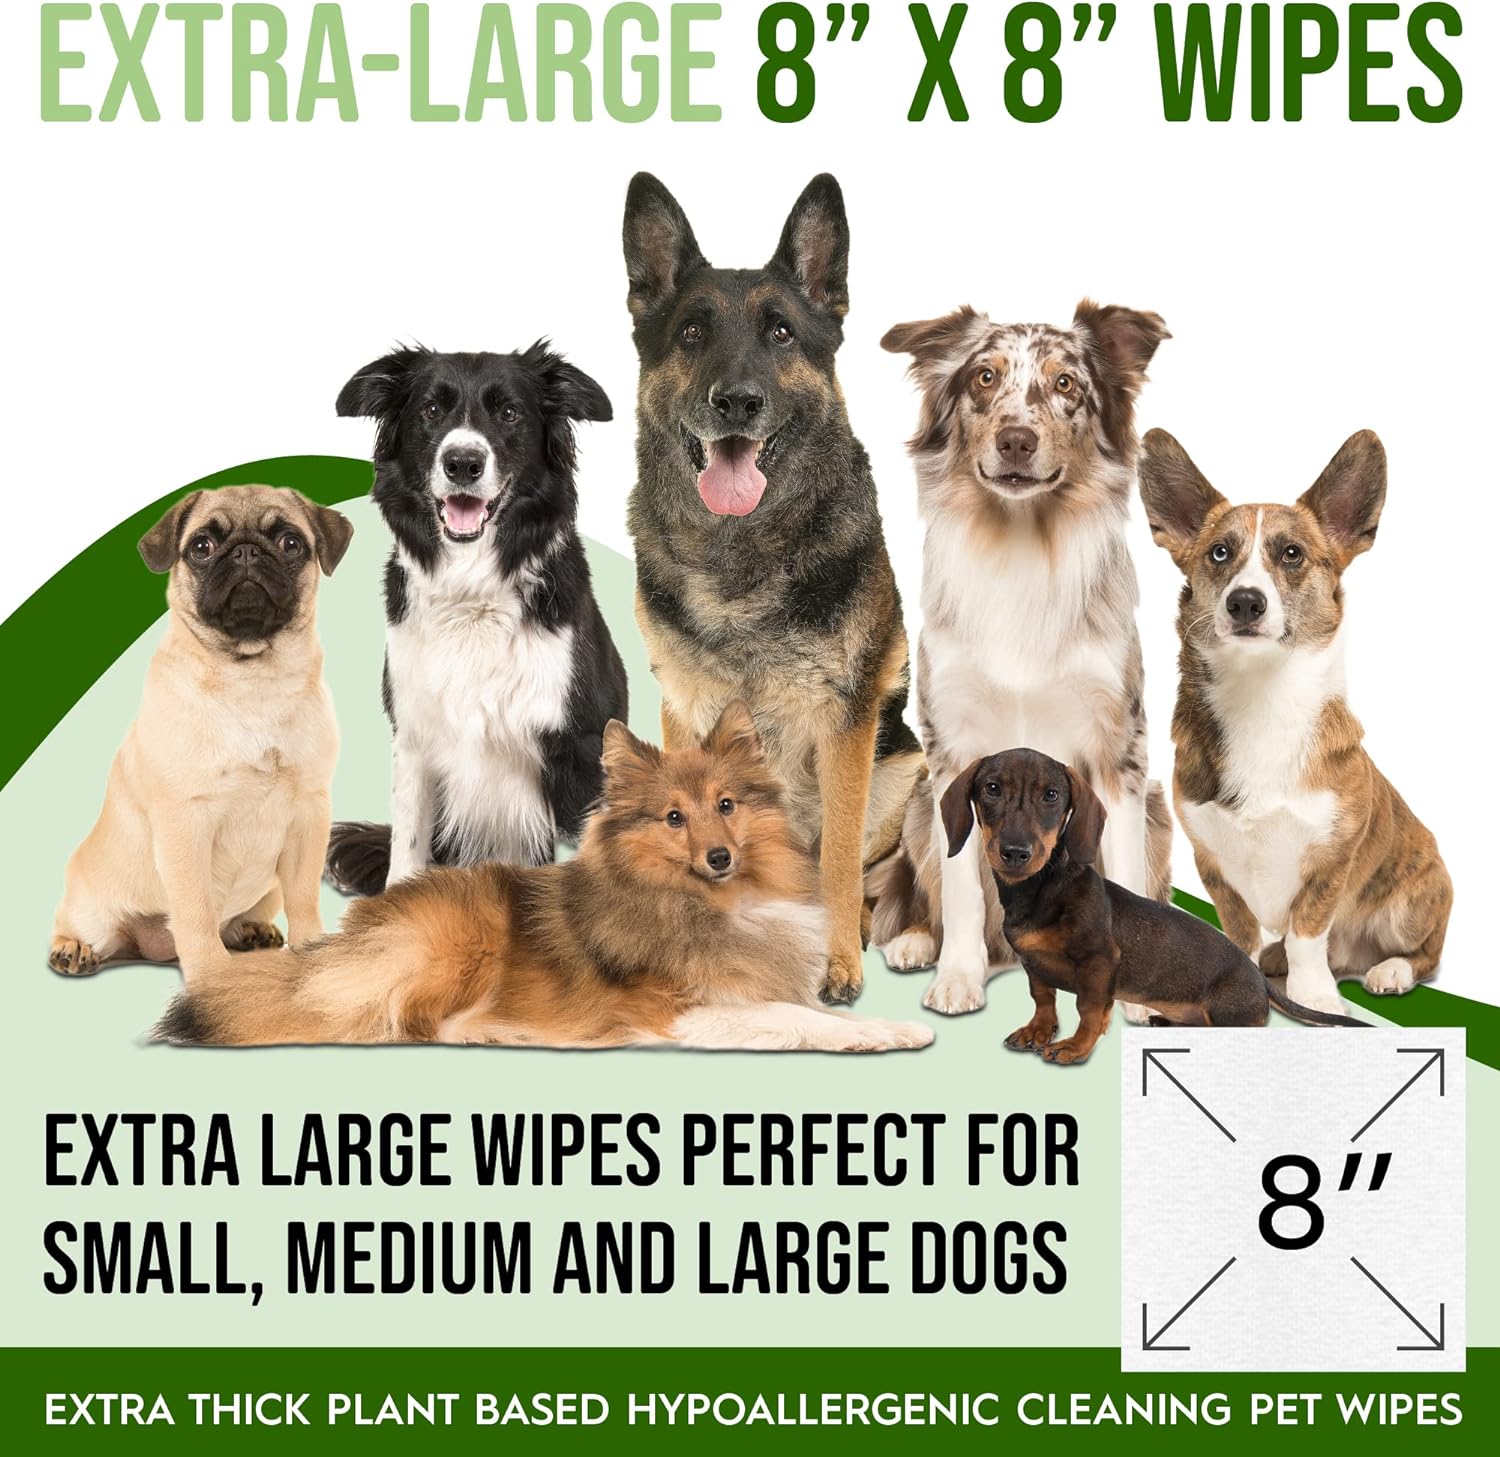 Petazy 400 Dog Wipes for Paws and Butt Ears Eyes | Organic Pet Wipes for Dogs | Lavender Scented Dog Wipes Cleaning Deodorizing | Extra Thick Paw Wipes for Dogs Cats Pets | Bonus Glove Wipes Included